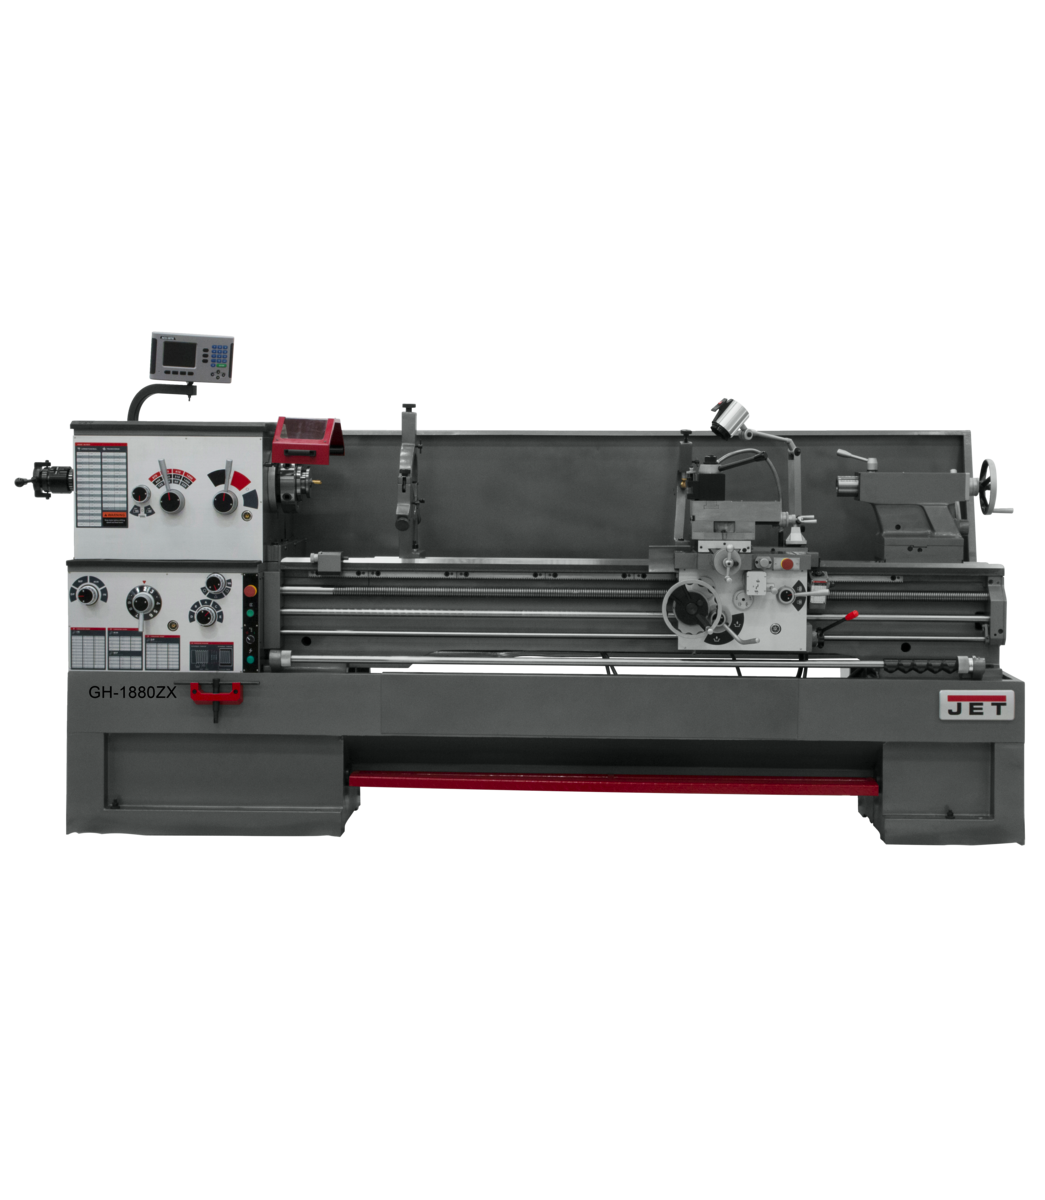 321493, GH-1880ZX Lathe with 2-axis ACU-RITE DRO 203, Collet Closer and Taper Attachment Installed, Jet, Metalworking, Turning, Lathes